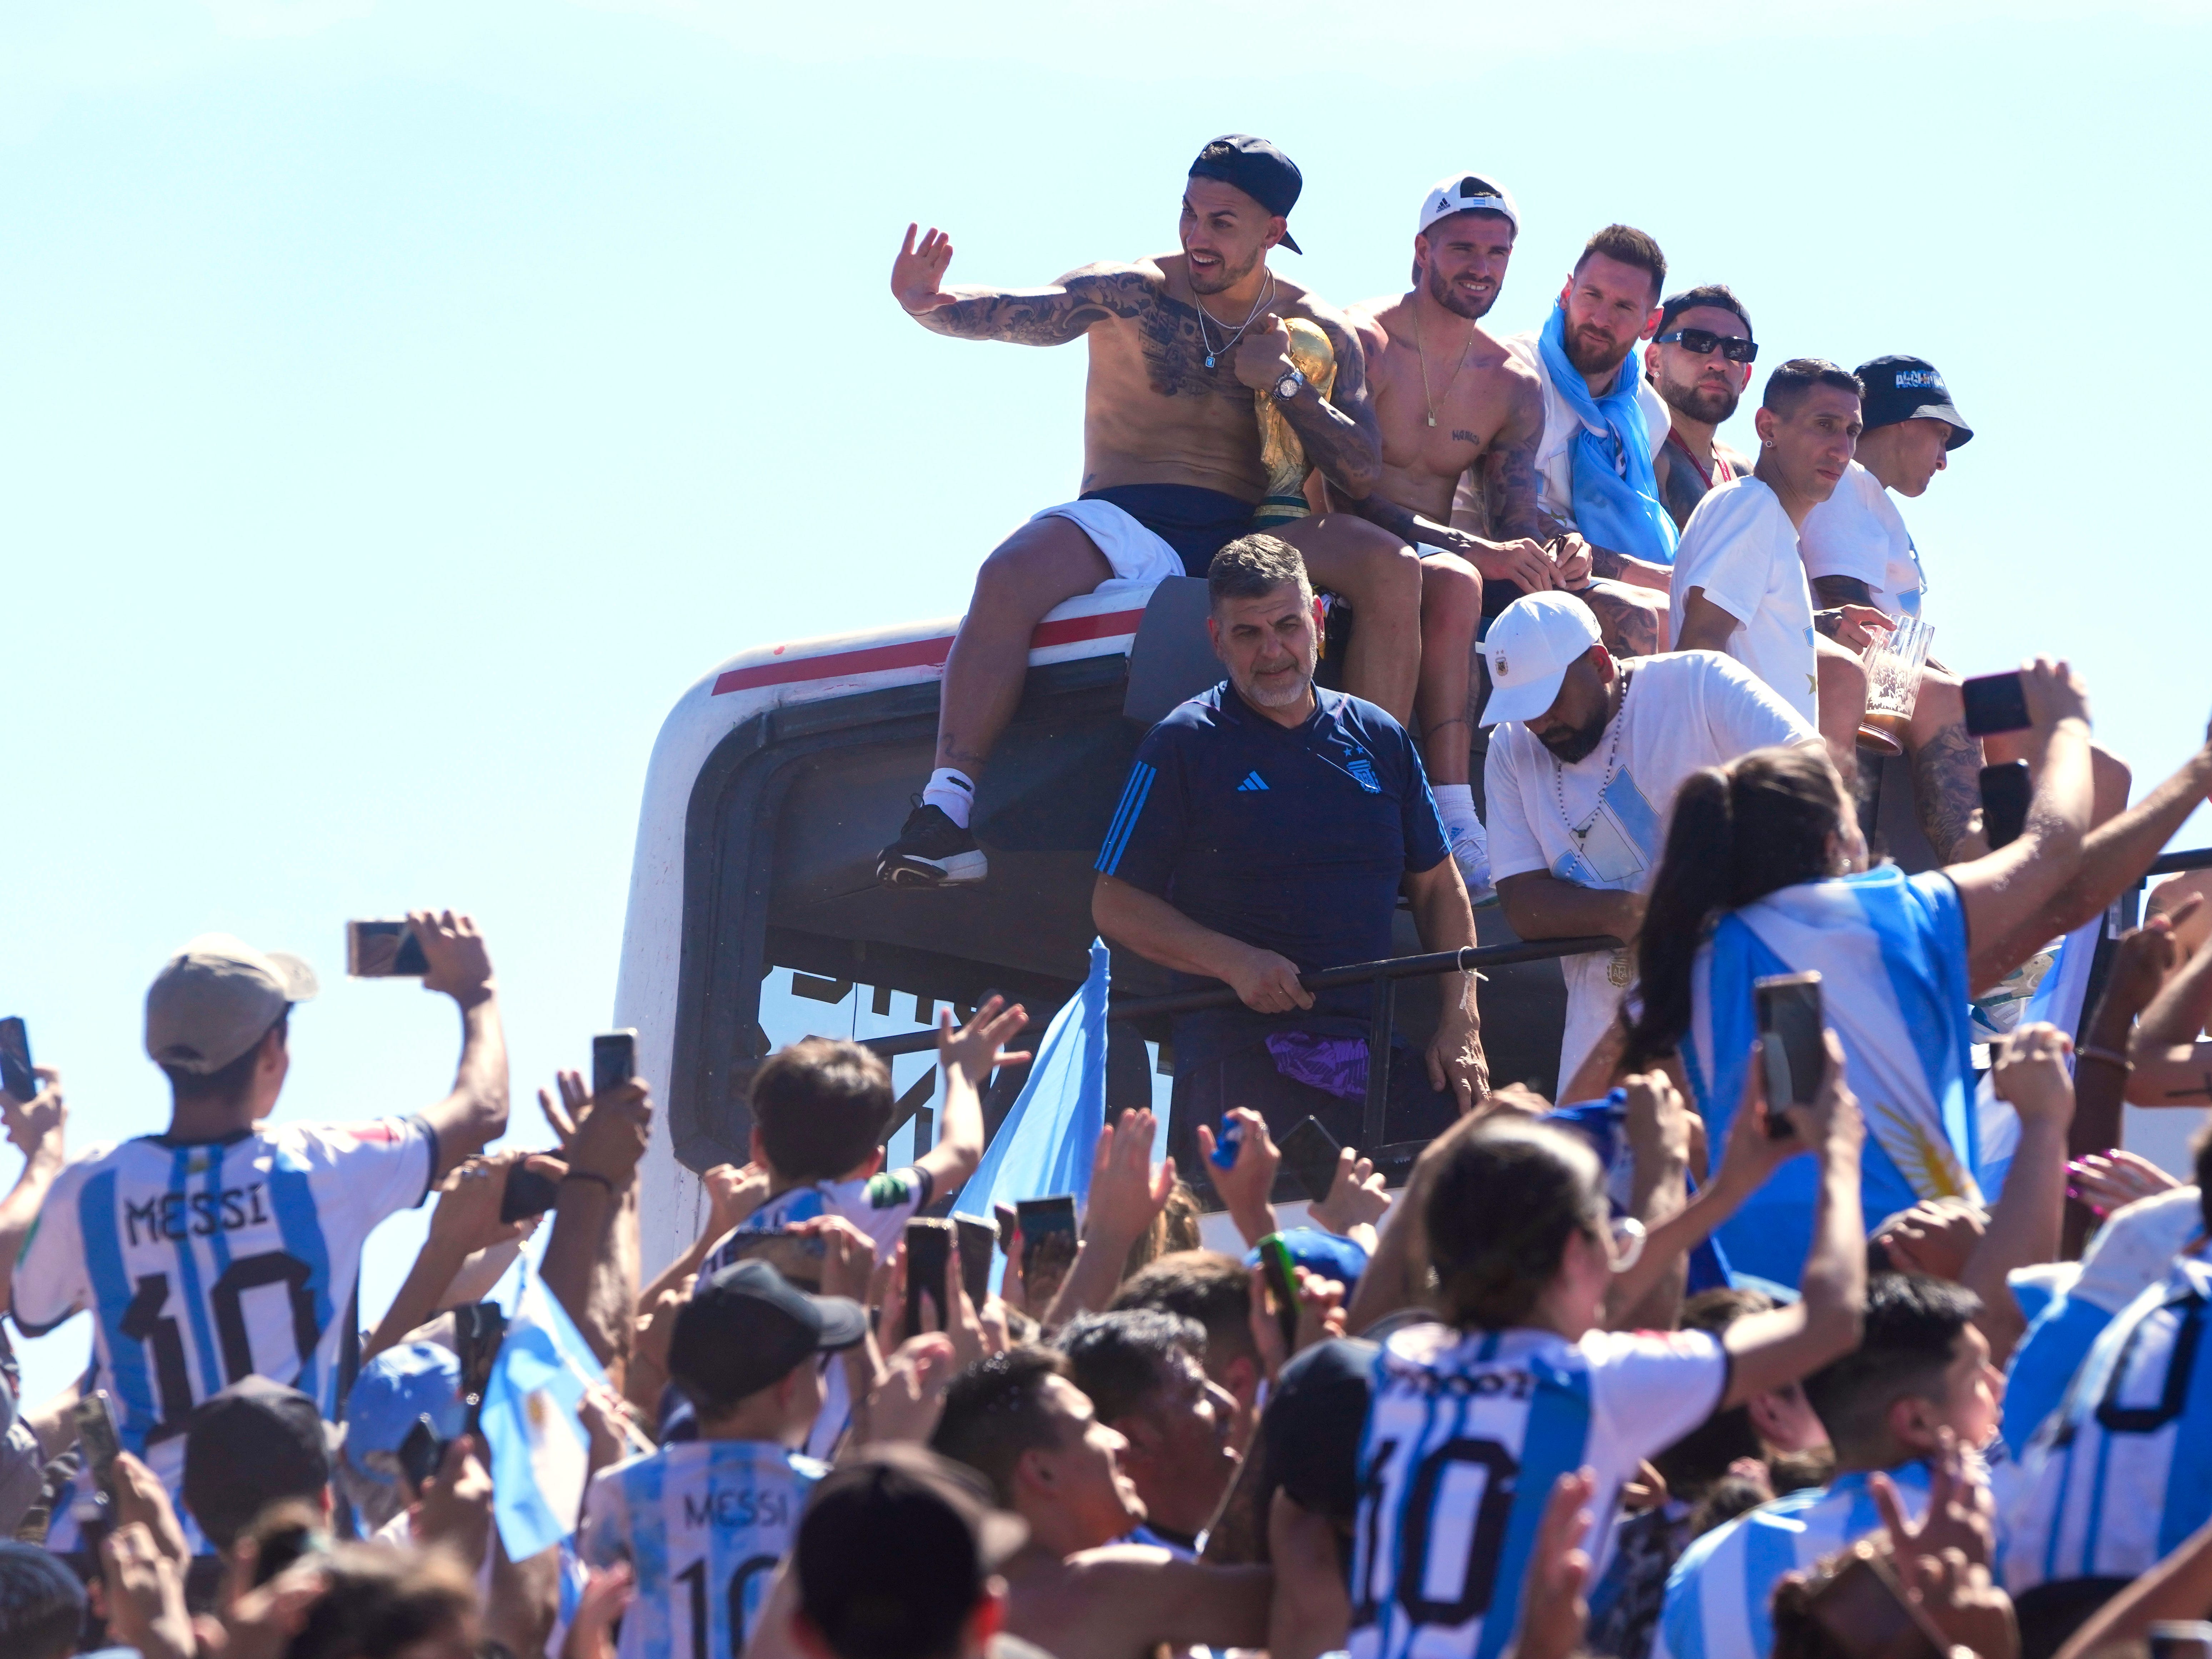 Argentina soccer players (from left) Leandro Paredes, Rodrigo De Paul, Lionel Messi and Nicolas Otamendi sit on the top of a bus during their team's homecoming parade after winning the World Cup.